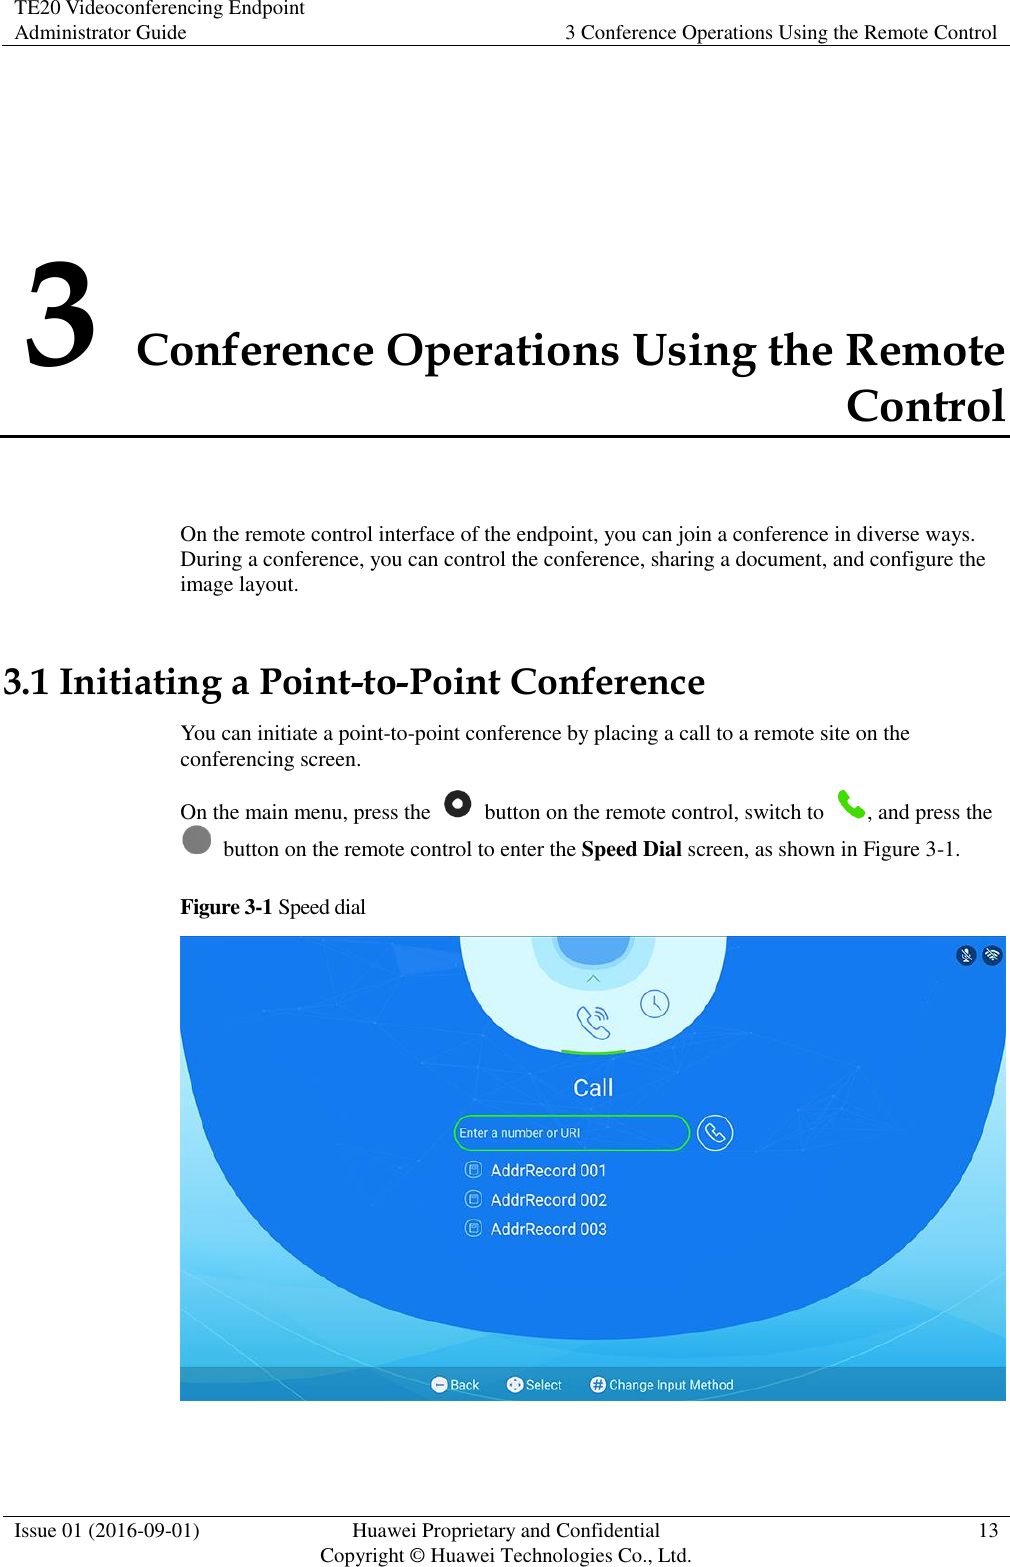 TE20 Videoconferencing Endpoint Administrator Guide 3 Conference Operations Using the Remote Control  Issue 01 (2016-09-01) Huawei Proprietary and Confidential                                     Copyright © Huawei Technologies Co., Ltd. 13  3 Conference Operations Using the Remote Control On the remote control interface of the endpoint, you can join a conference in diverse ways. During a conference, you can control the conference, sharing a document, and configure the image layout. 3.1 Initiating a Point-to-Point Conference You can initiate a point-to-point conference by placing a call to a remote site on the conferencing screen. On the main menu, press the    button on the remote control, switch to  , and press the   button on the remote control to enter the Speed Dial screen, as shown in Figure 3-1. Figure 3-1 Speed dial   